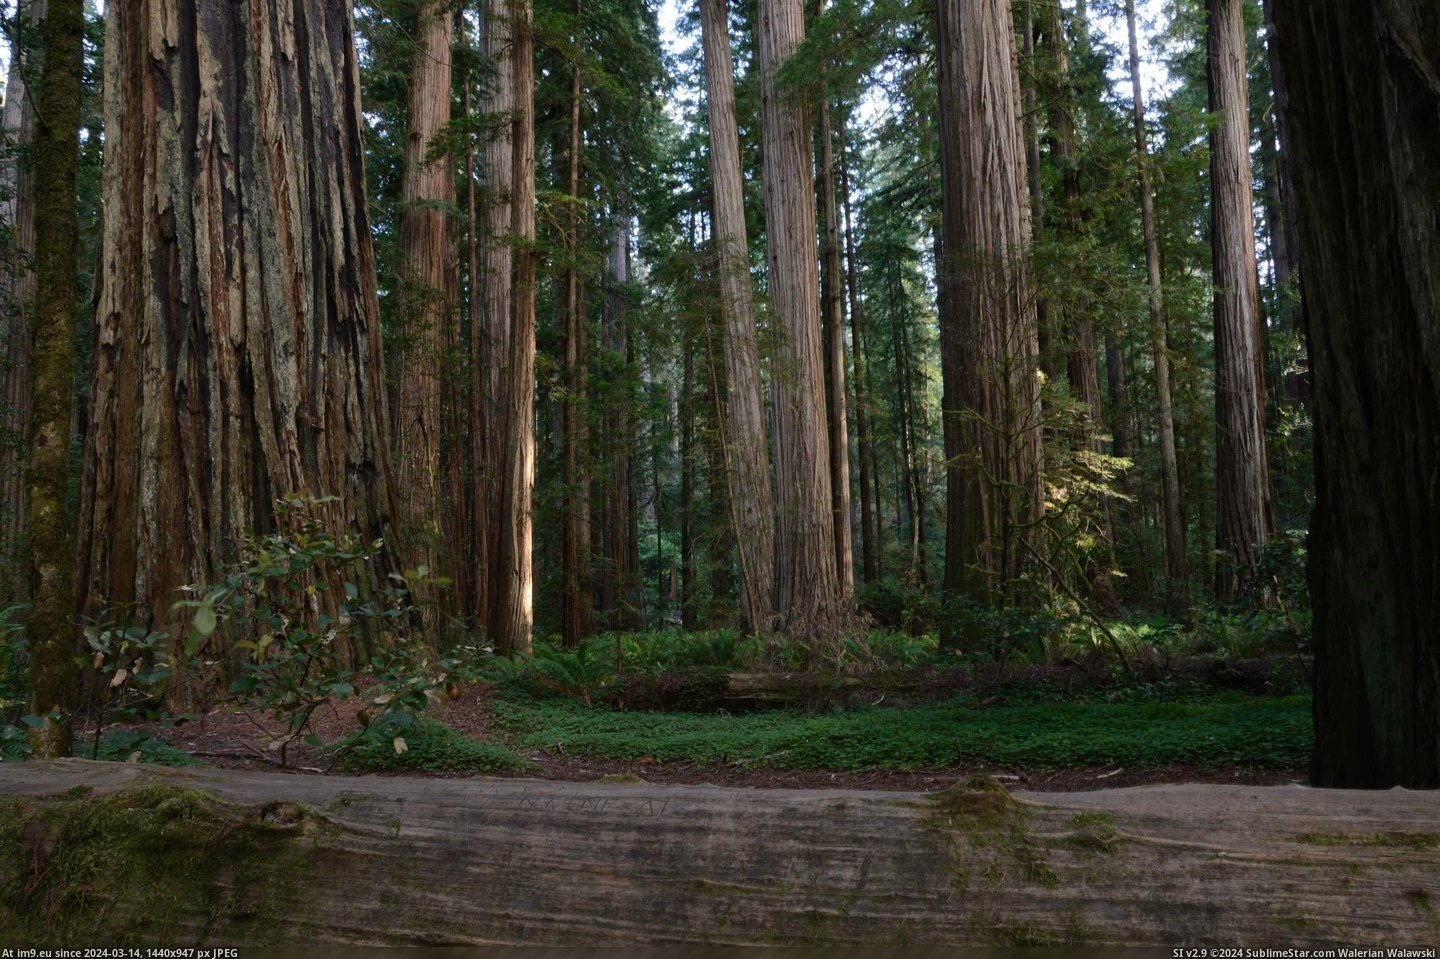 #Park #California #State #Redwoods #Jedediah #Smith #Redwood #Speaking [Earthporn] Speaking of Redwoods: Jedediah Smith Redwood State Park, California, [2710x1795] [OC] Pic. (Bild von album My r/EARTHPORN favs))